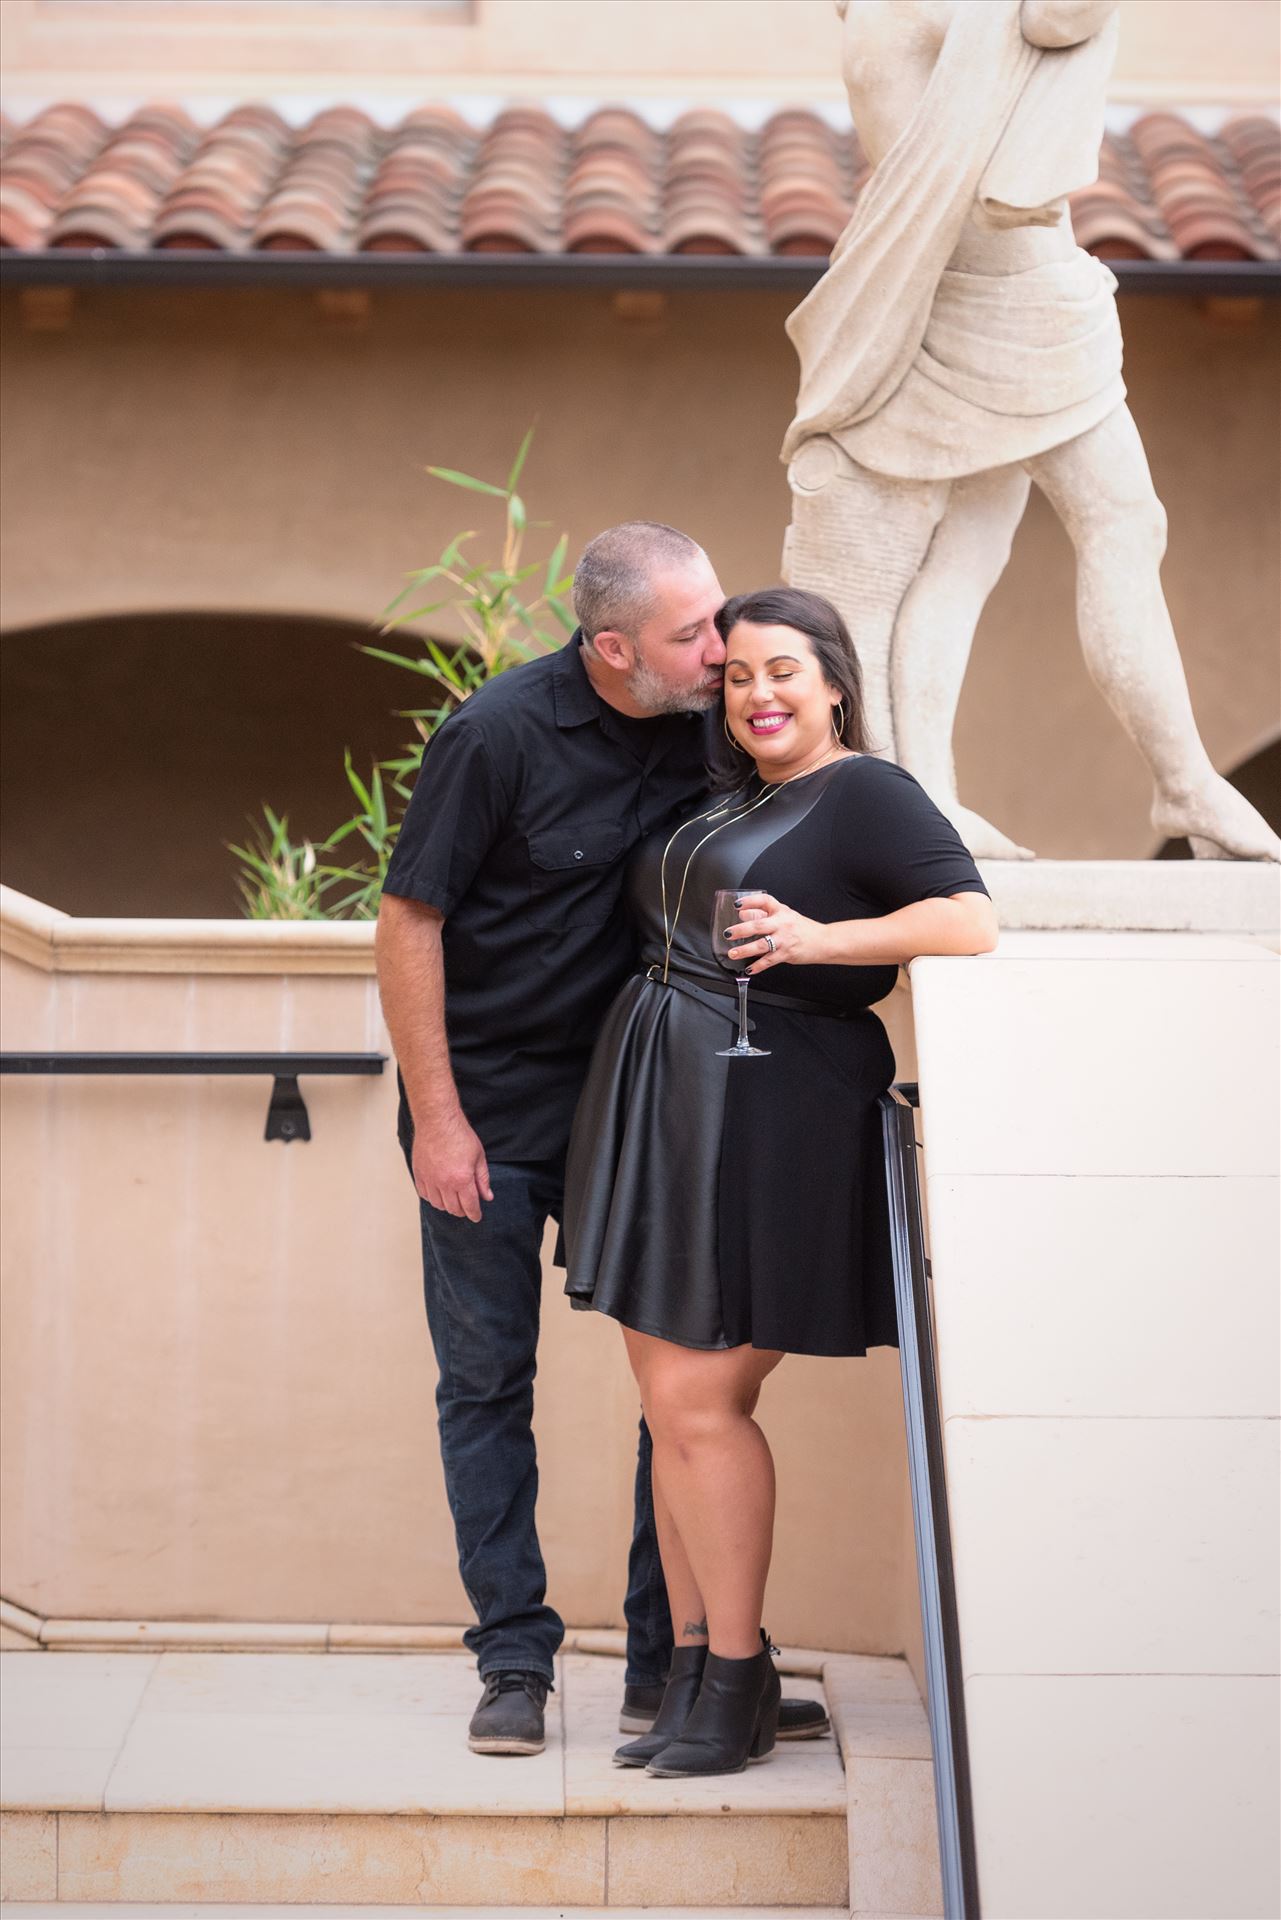 Final-8428.JPG - Sarah Williams of Mirror's Edge Photography, a San Luis Obispo Wedding, Engagement and Portrait Photographer, captures the Foster Family Fall Session at the gorgeous Allegretto Resort and Vineyards in Paso Robles, California. Romance by Sarah Williams